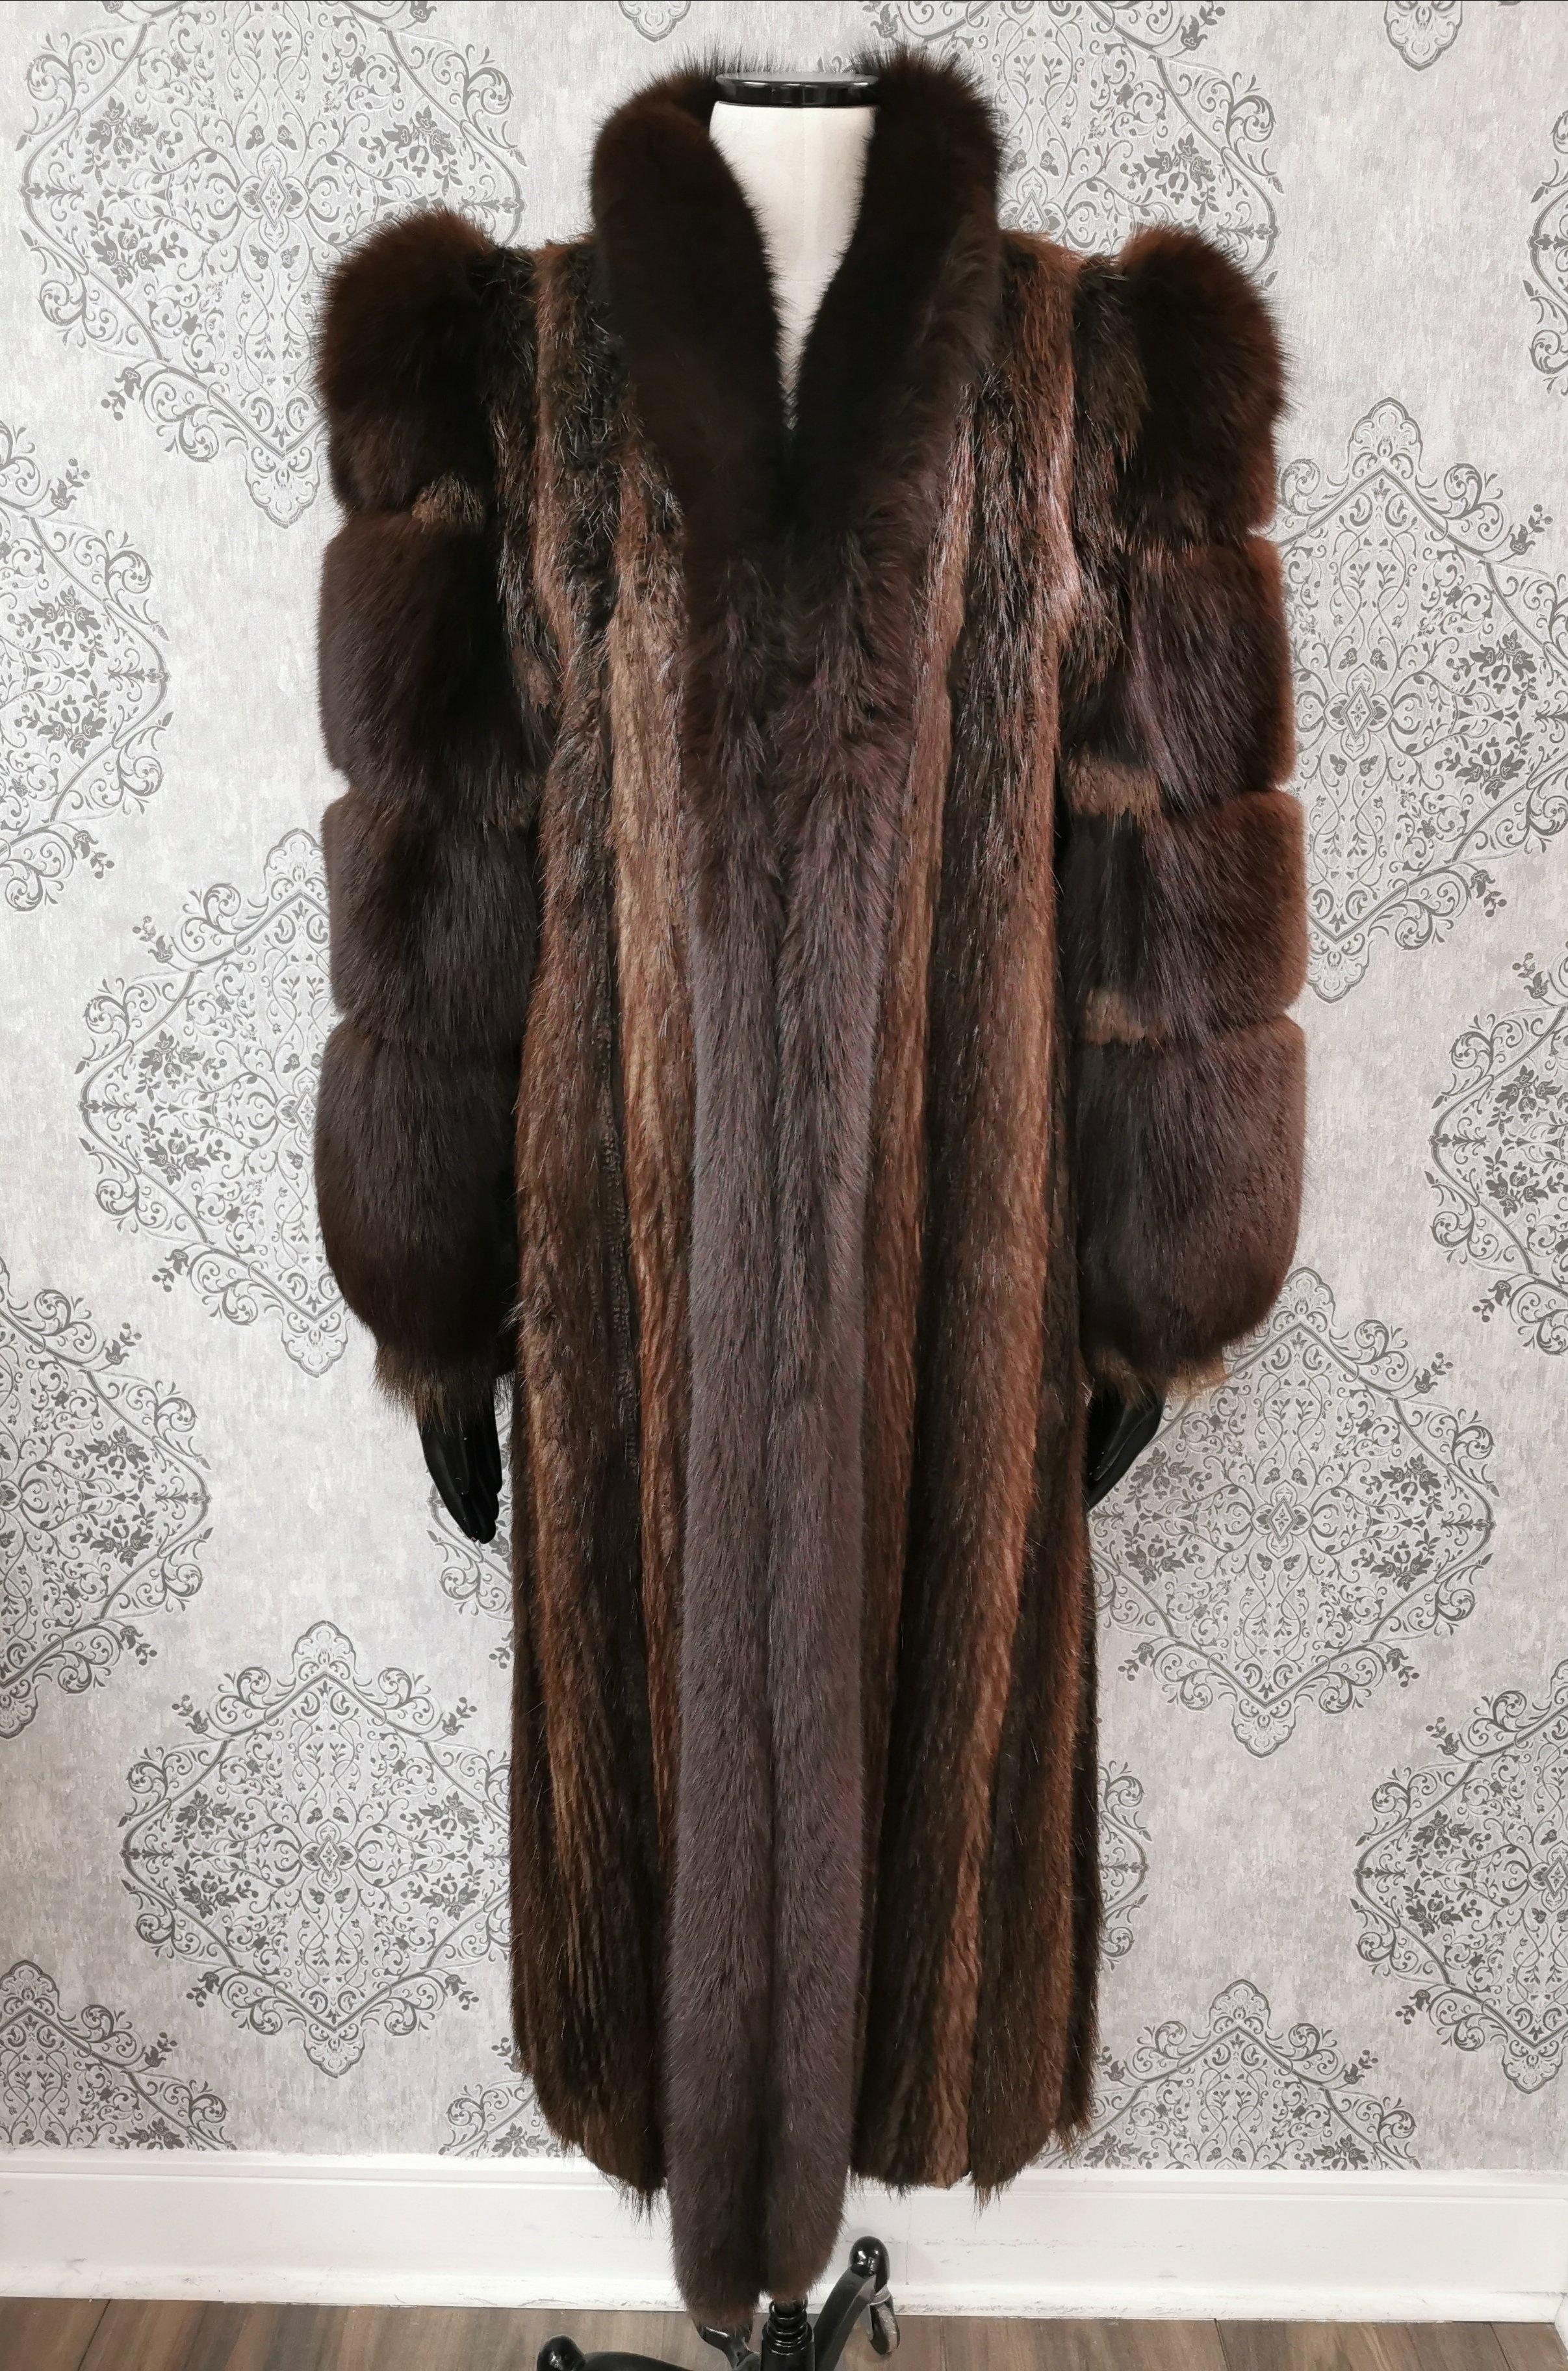 PRODUCT DESCRIPTION:

Brand new luxurious Paul Madger Beaver fur mid-length coat with dyed shadow fur collar trim and sleeves

Condition: Like new

Closure: Hooks & Eyes

Color: Brown

Material: Beaver fur and Fox fur

Garment type: Mid-length